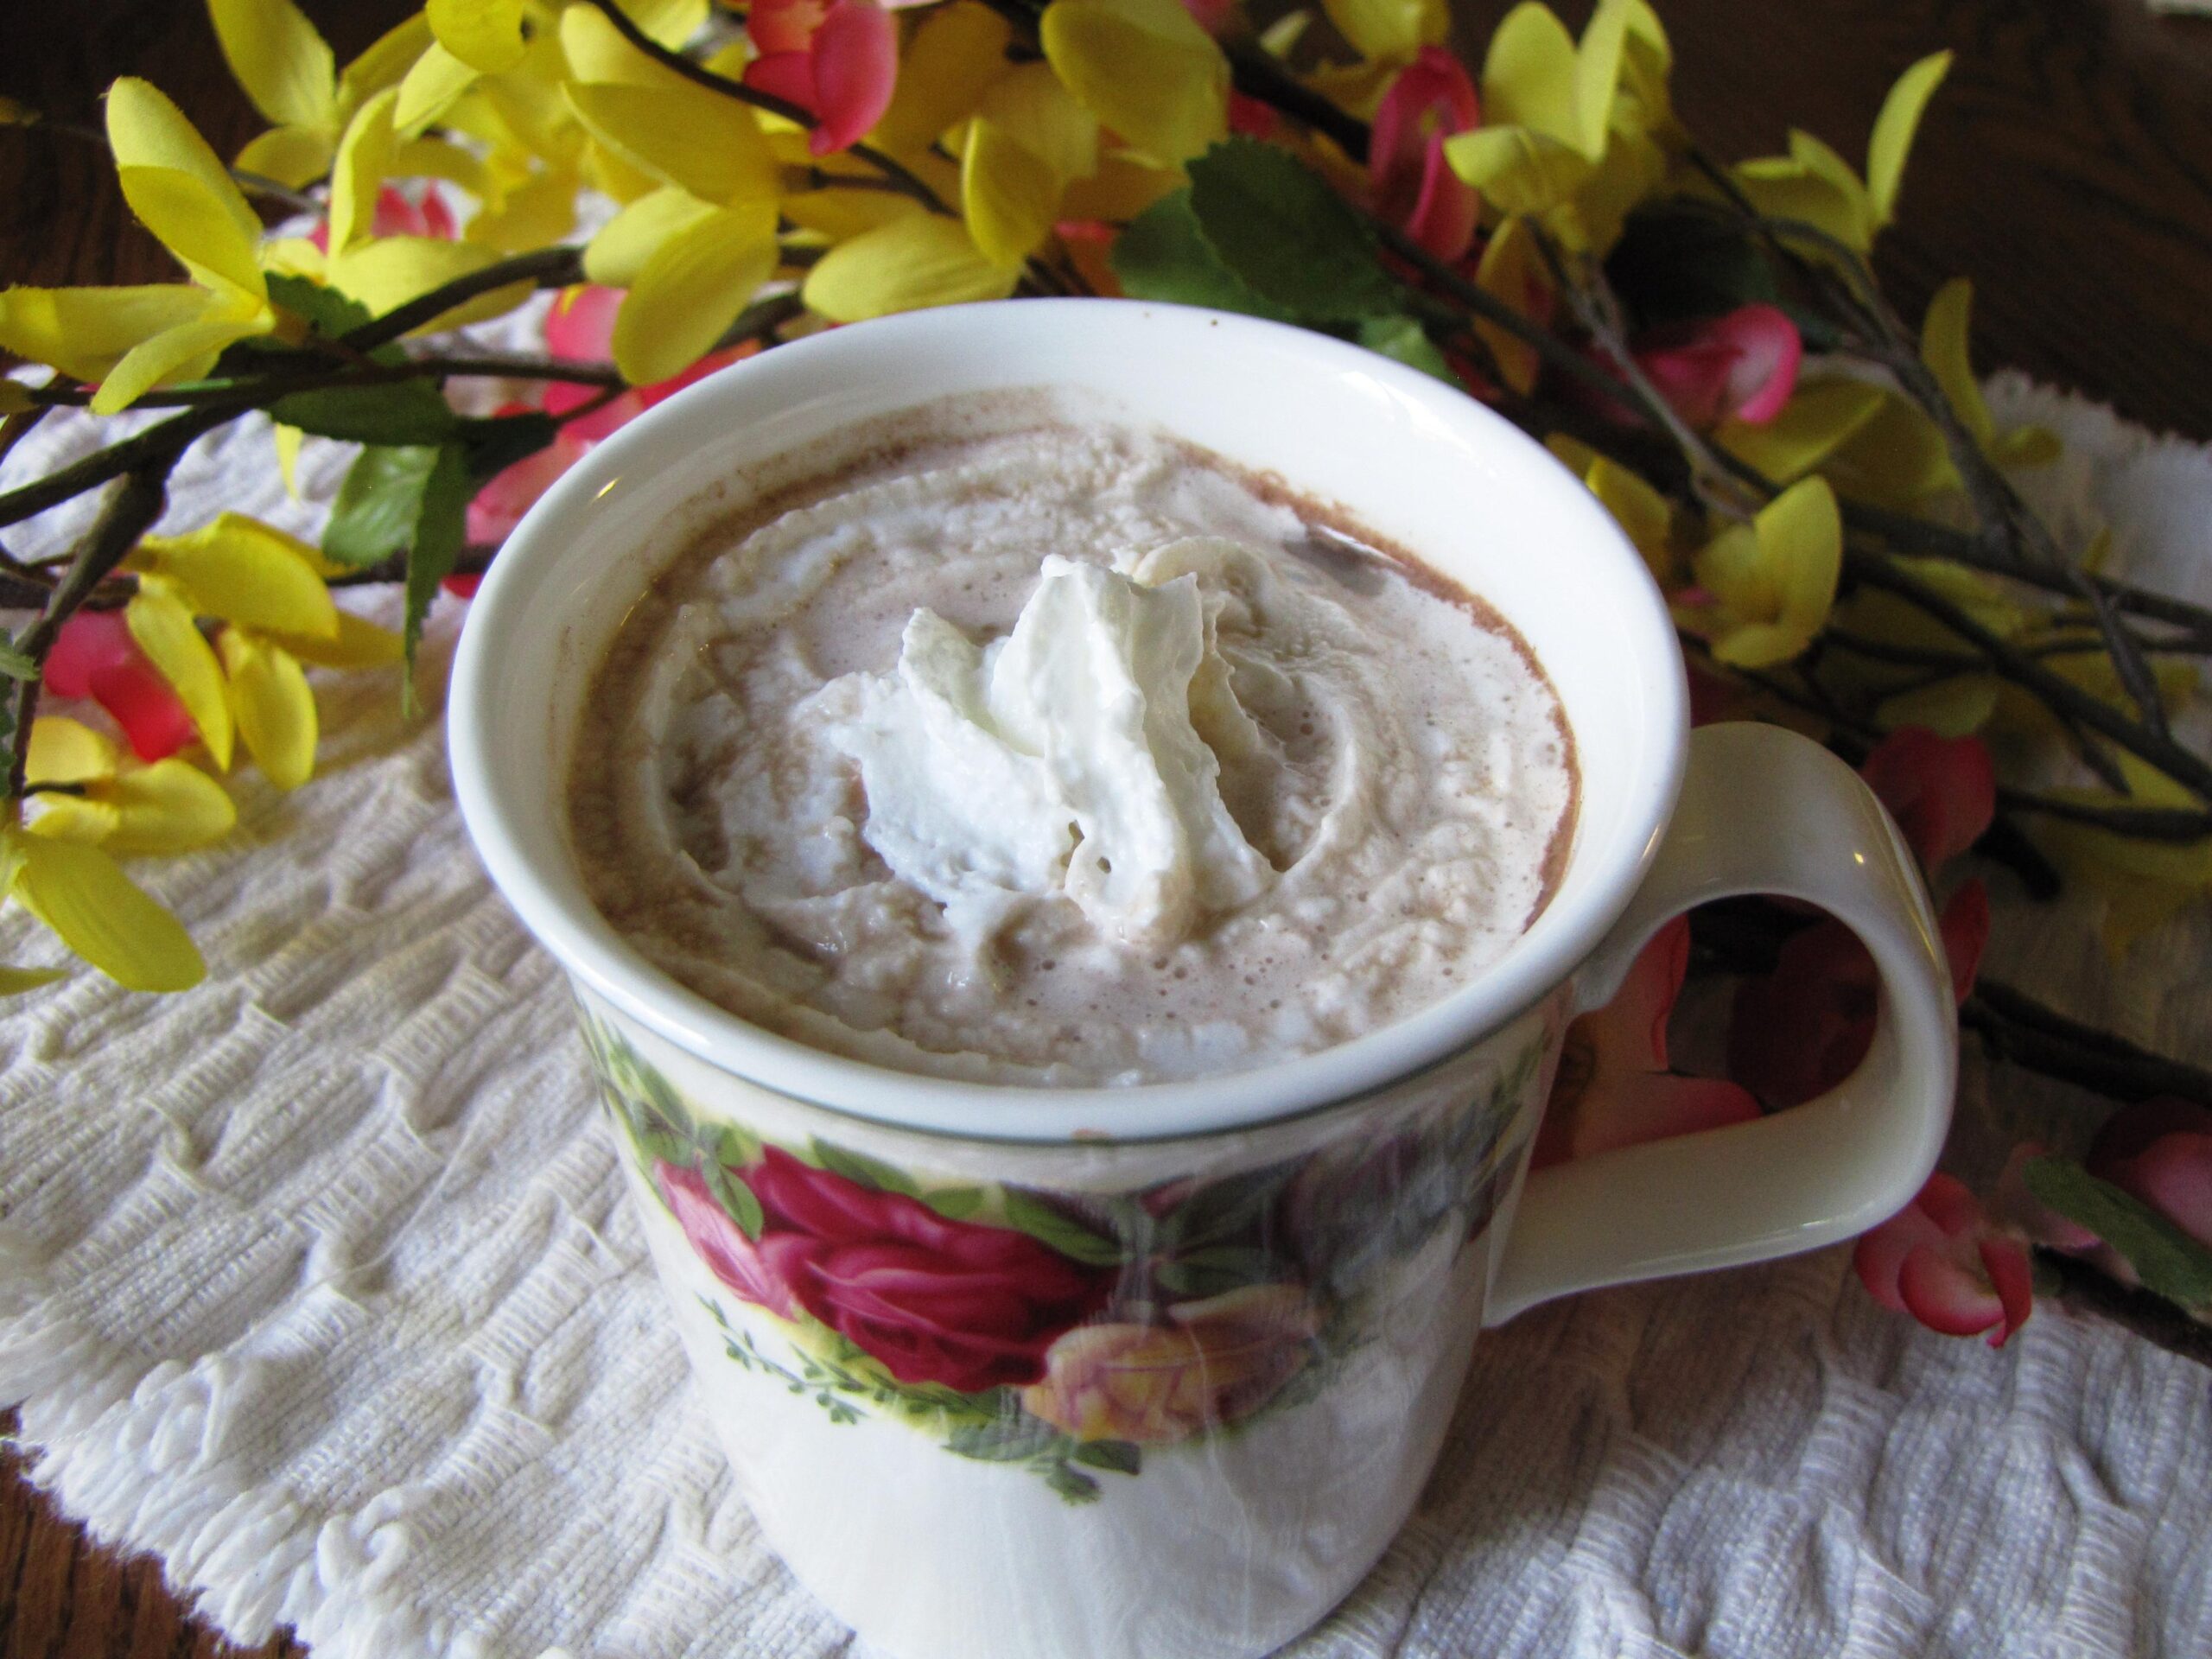  This rich and creamy coffee is a treat for your taste buds